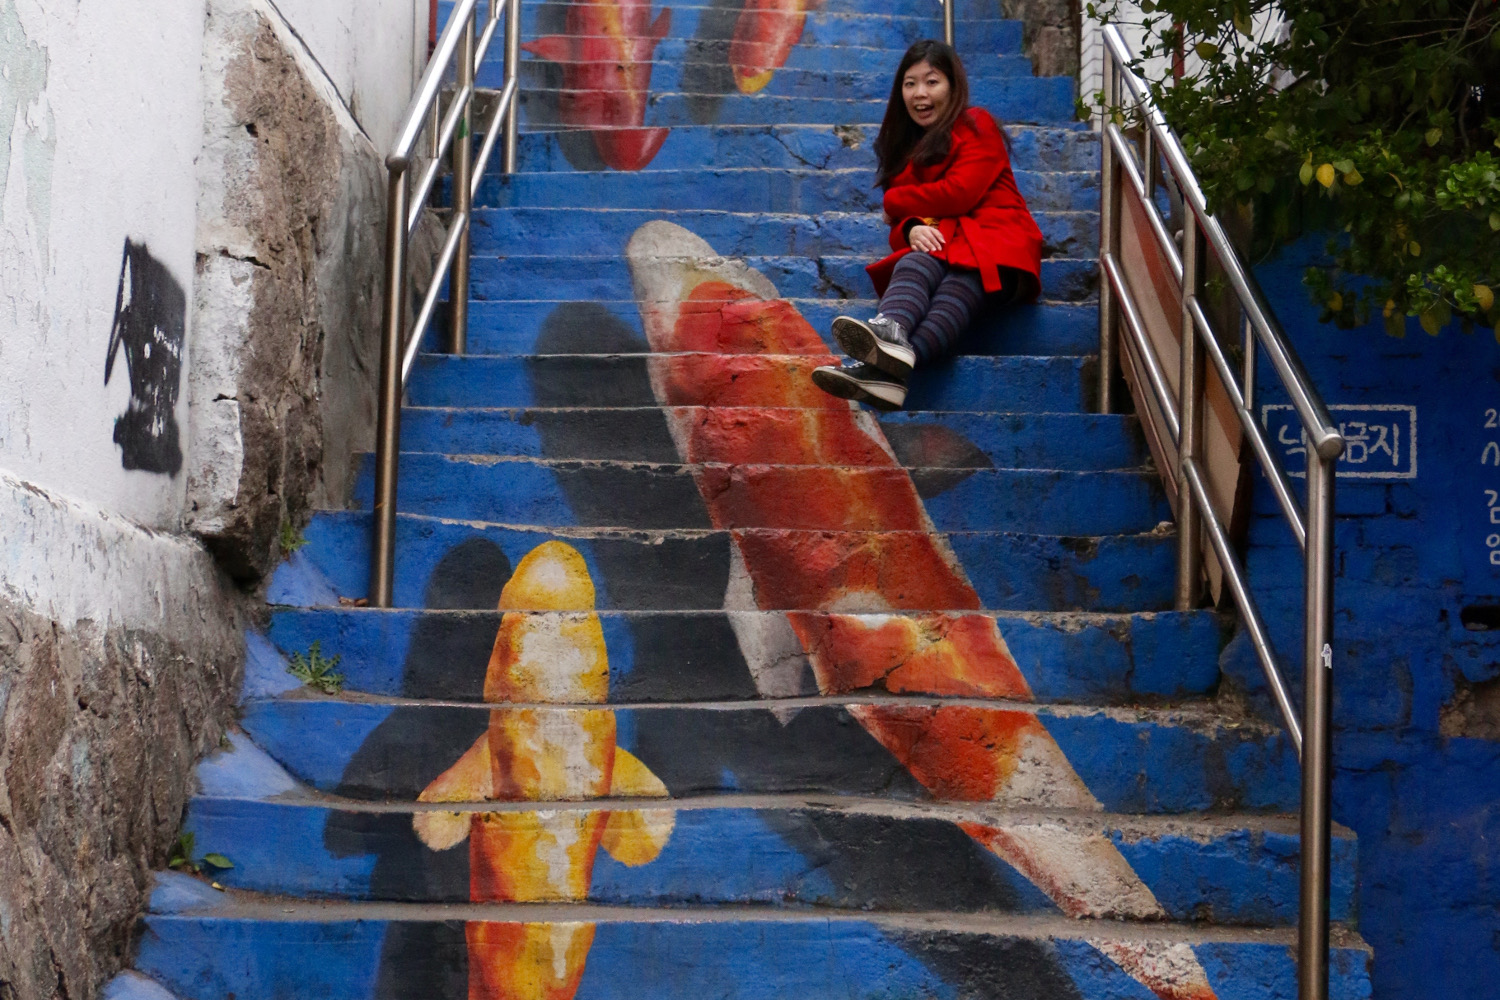 Mural on steps of Ihwa Maeul. Image by Simon Richmond / Lonely Planet